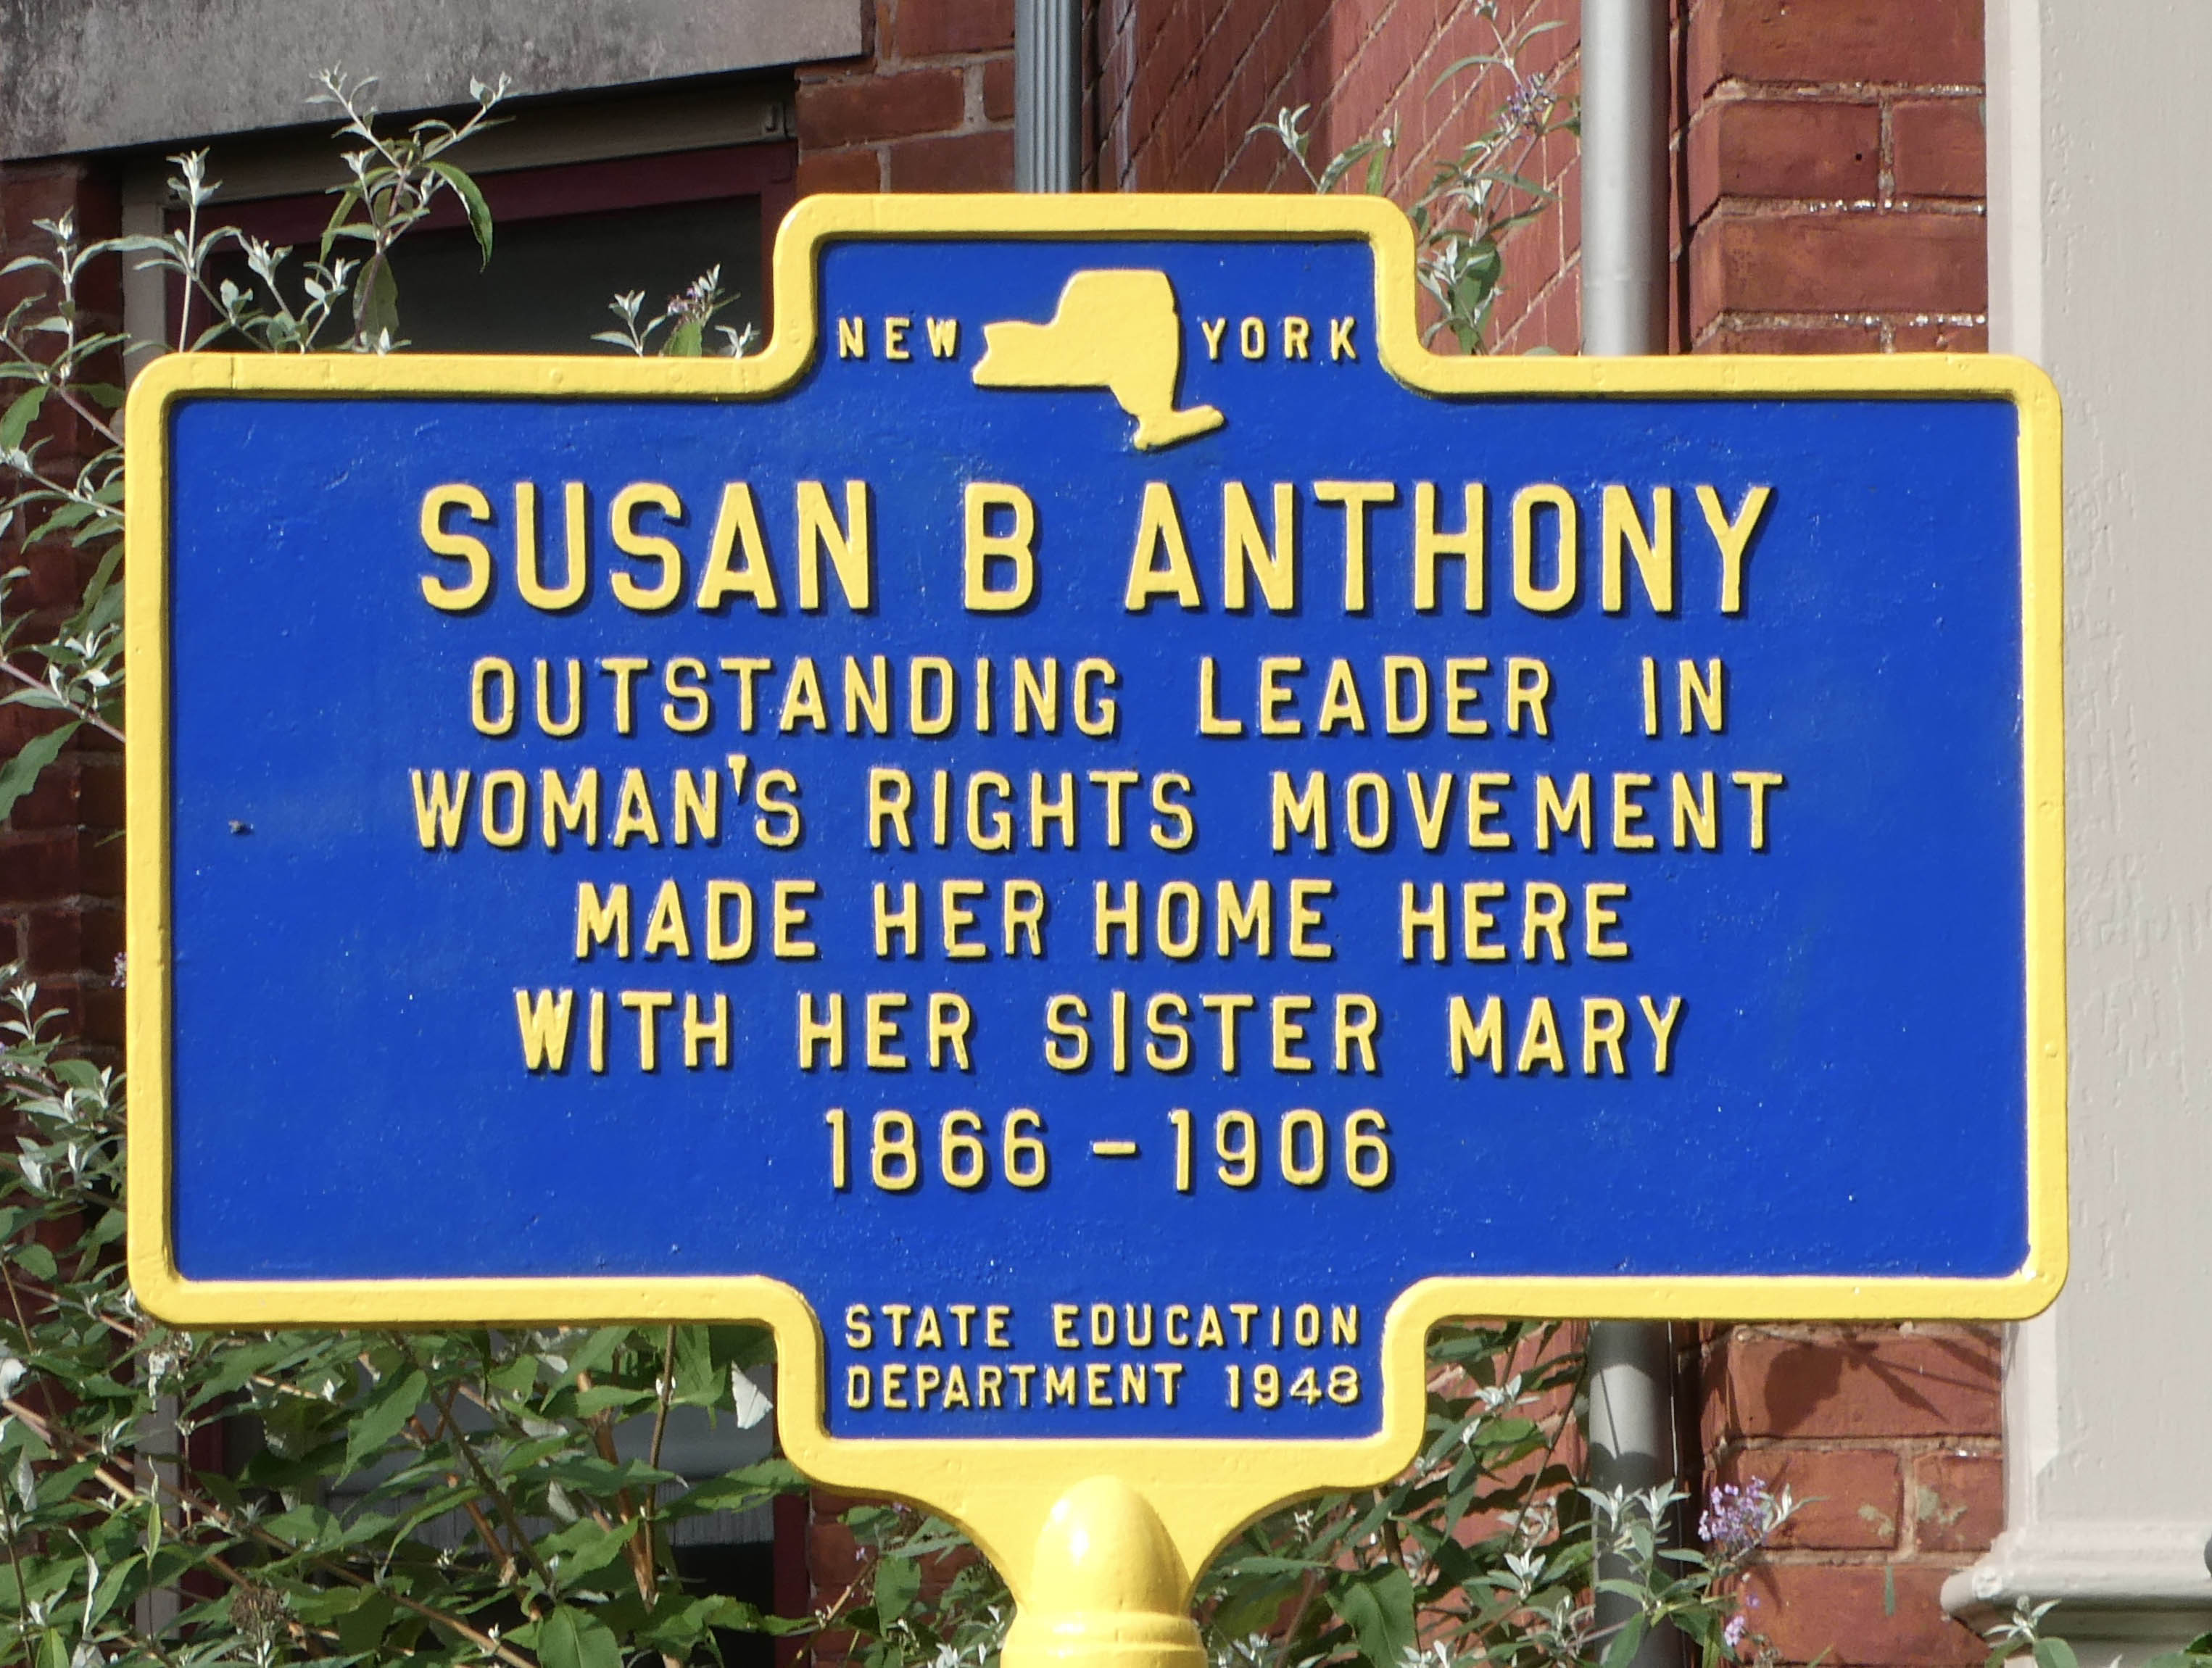 Susan B. Anthony, Rochester